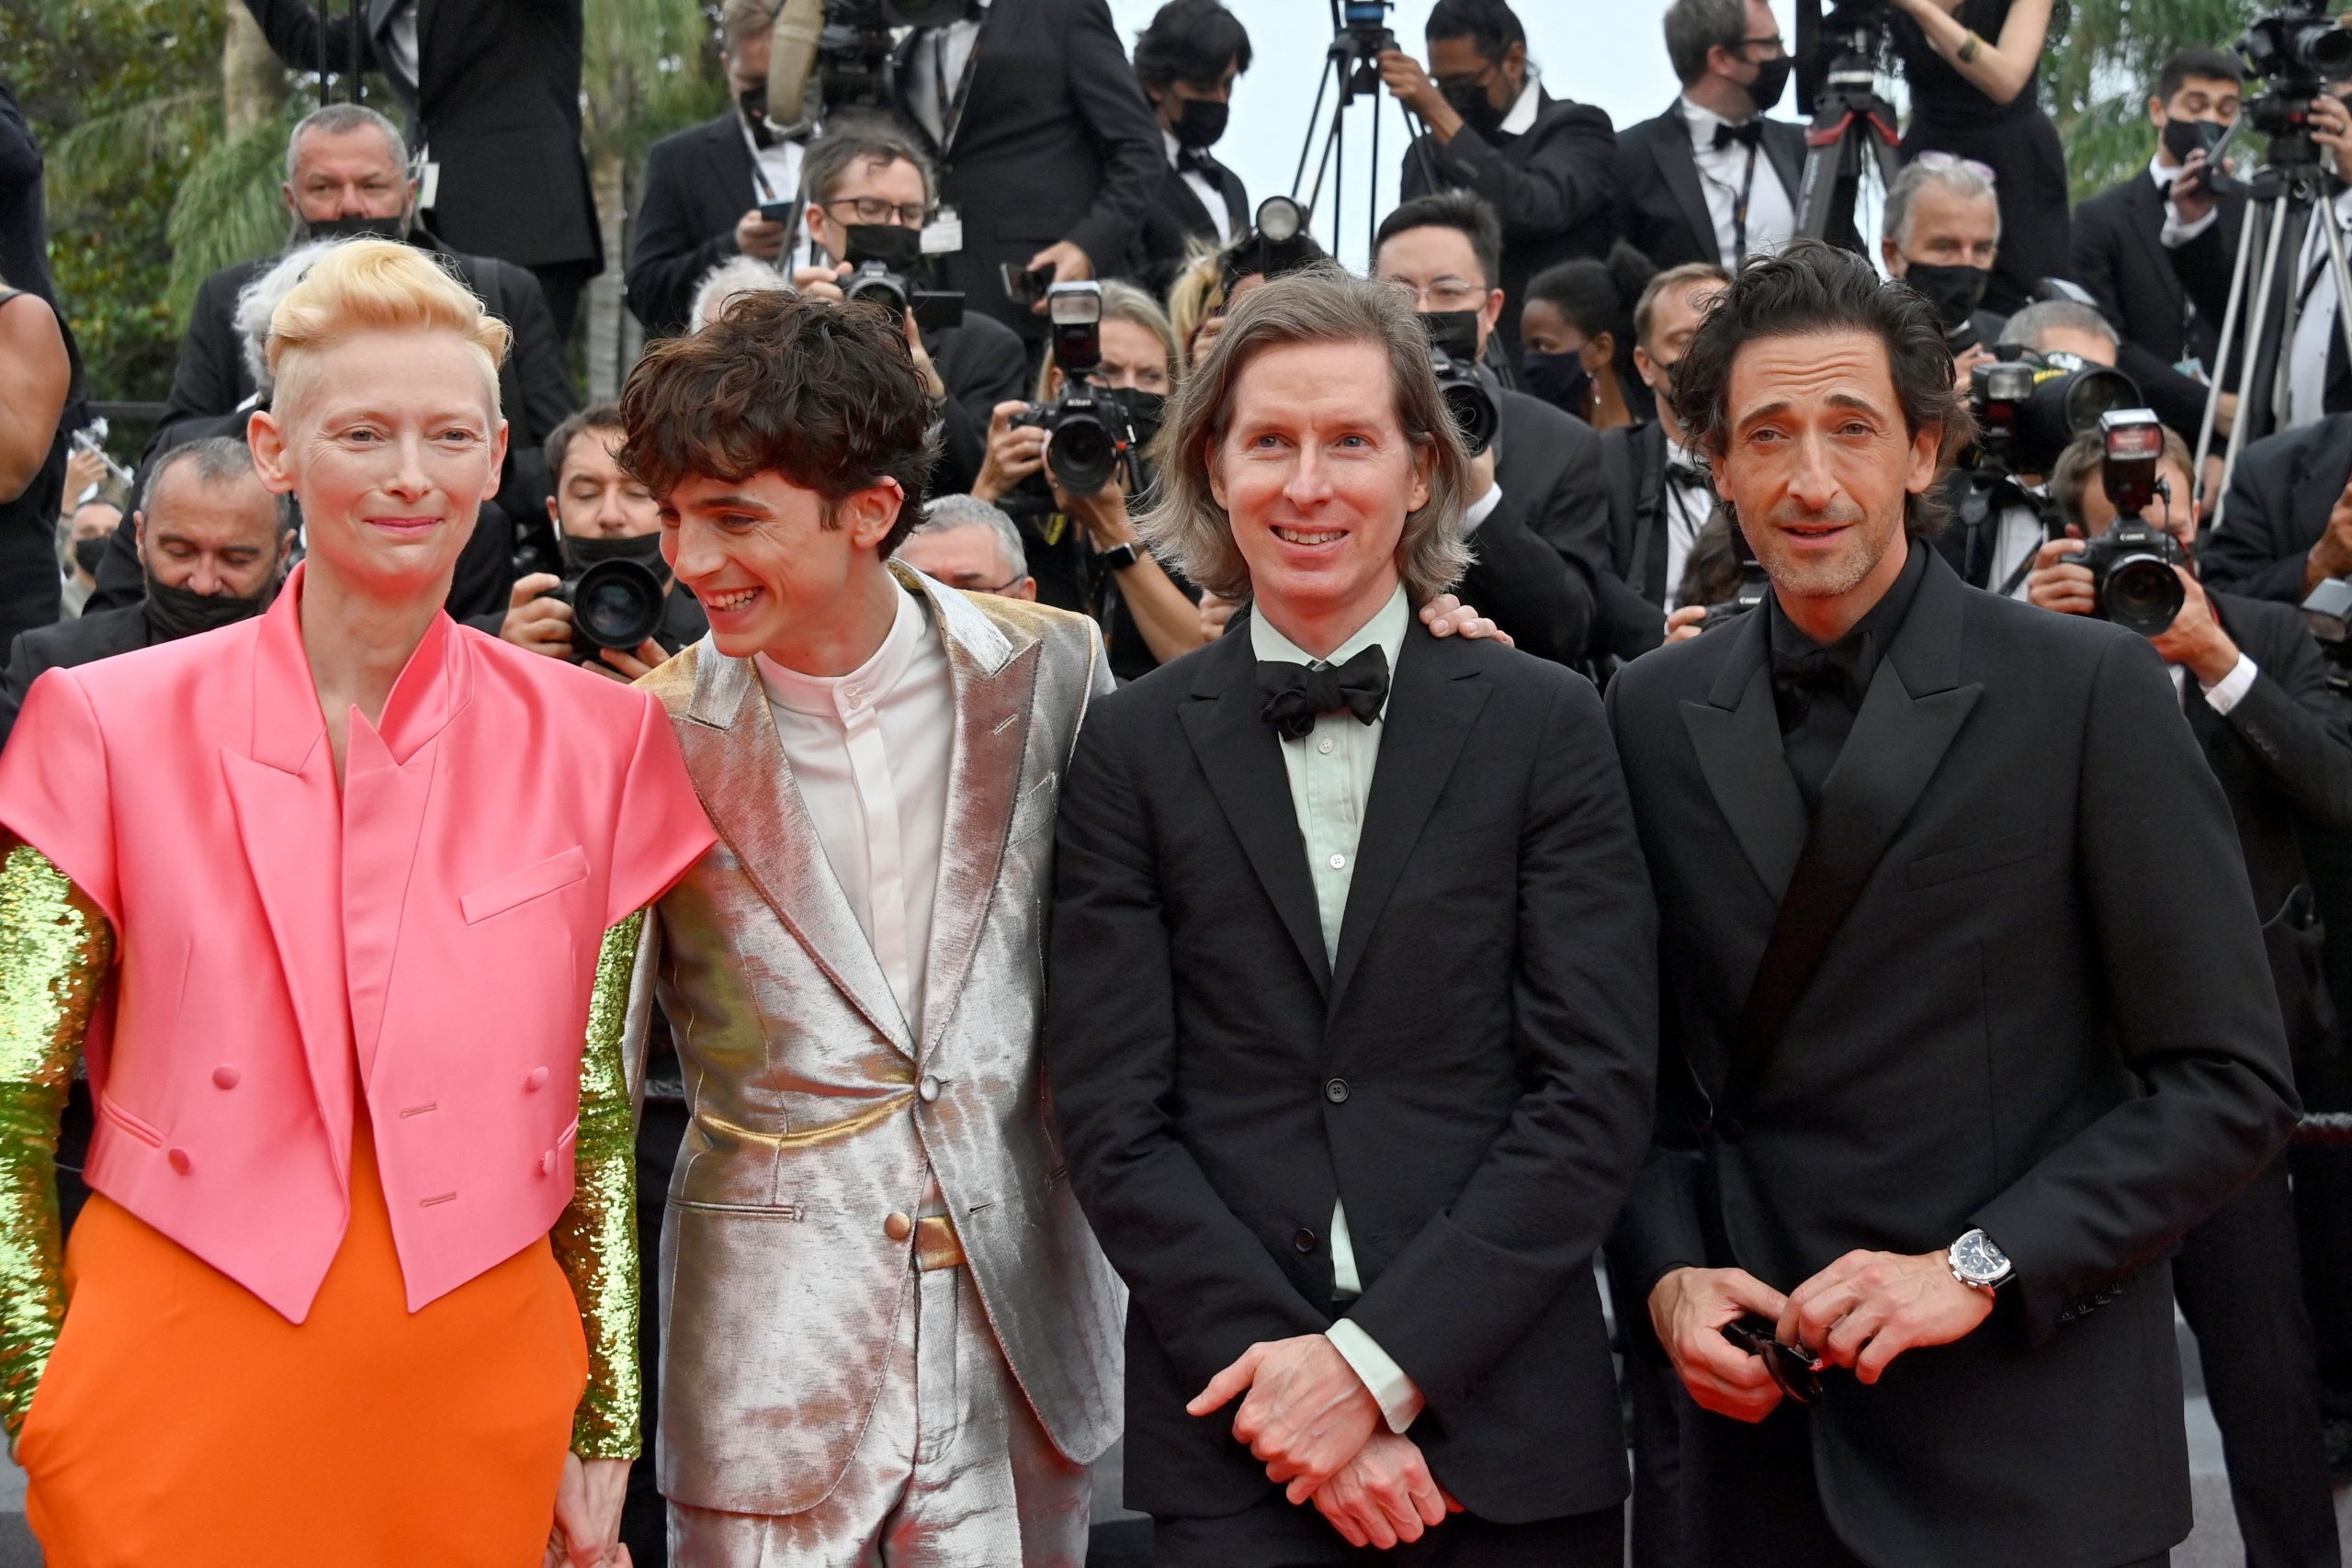 Timothee Chamalet and Tilda Swinton share a moment in ‘The French Dispatch’ premiere